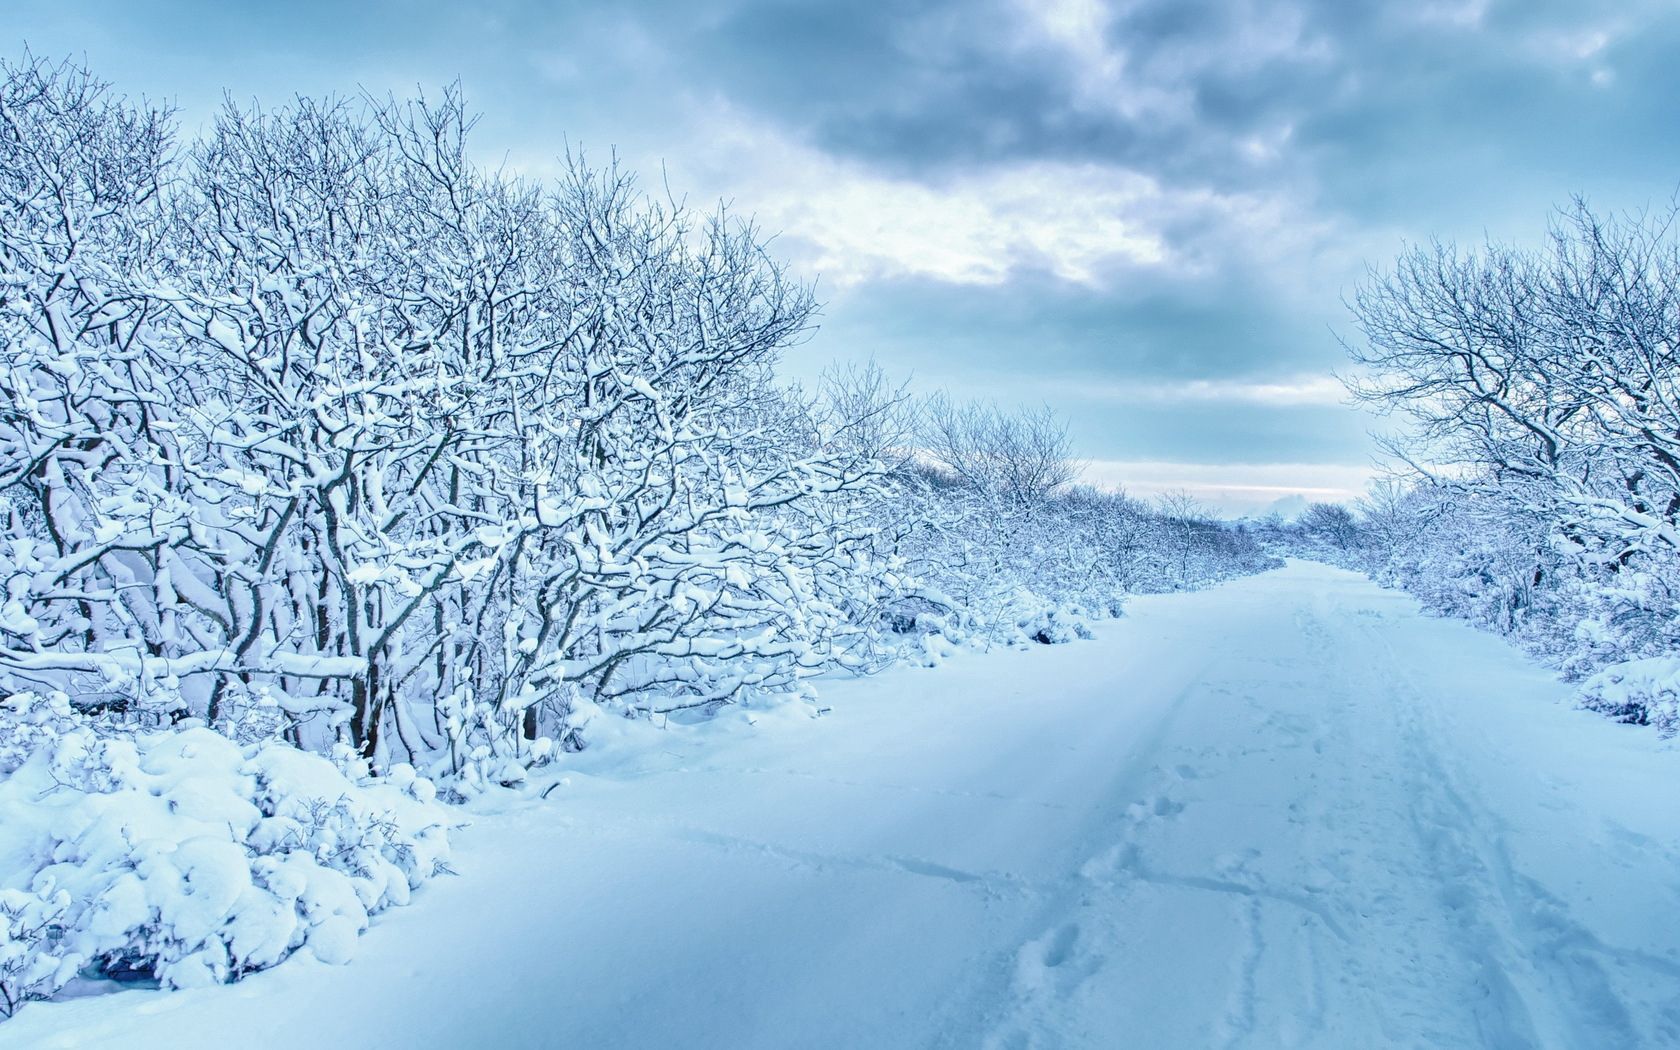 Download wallpaper 1680x1050 snow, trees, road, traces, winter